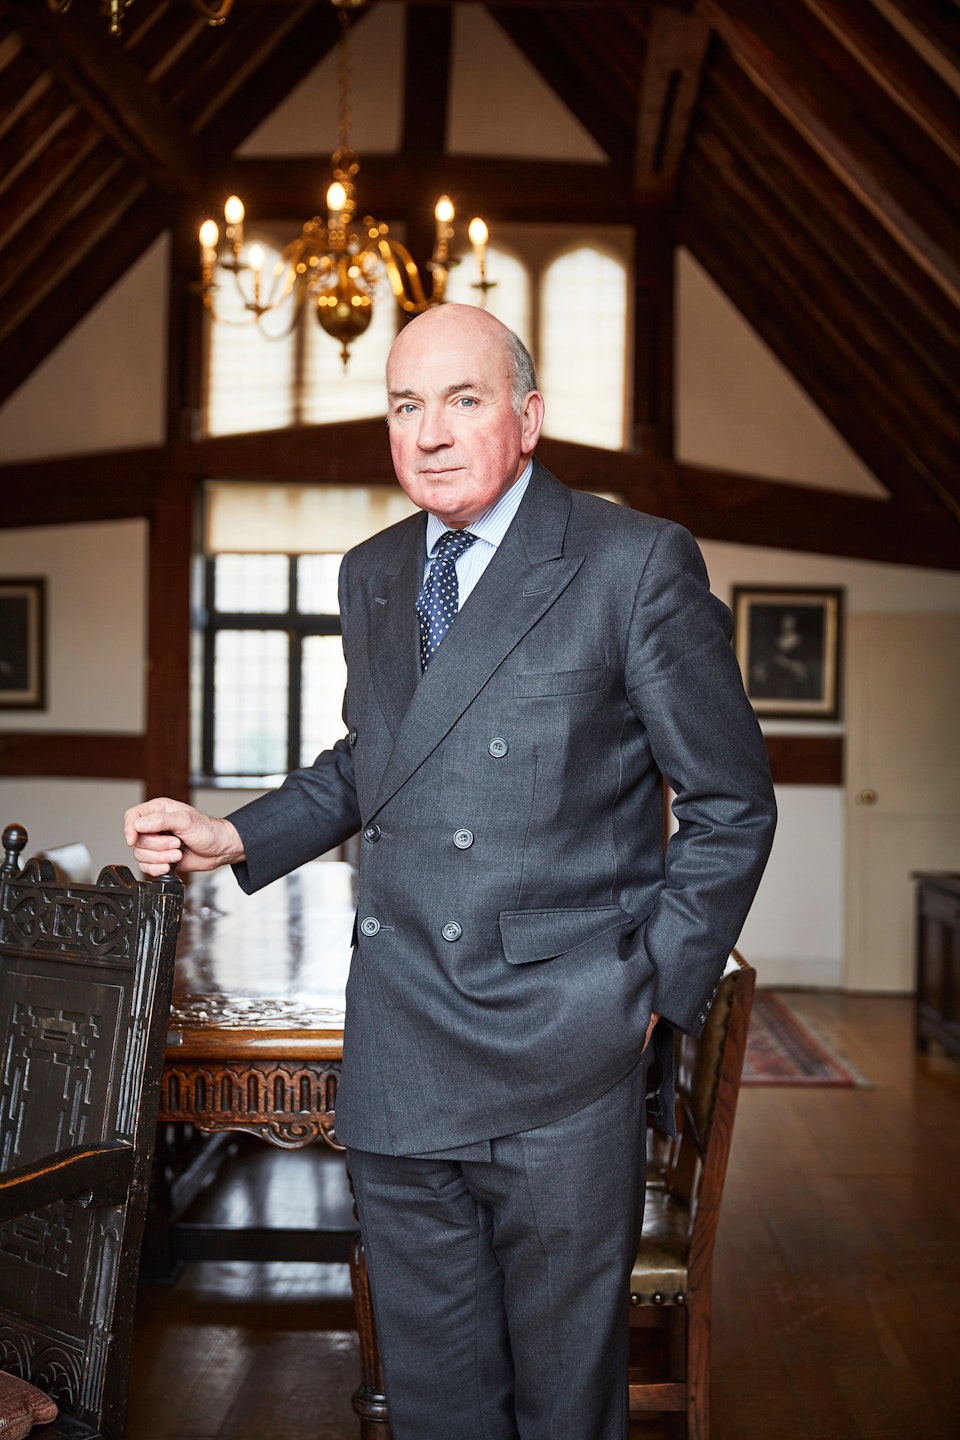 Portraits - Lord Dannatt - Photographed at The Tower Of London for The London Magazine / Cedar Content